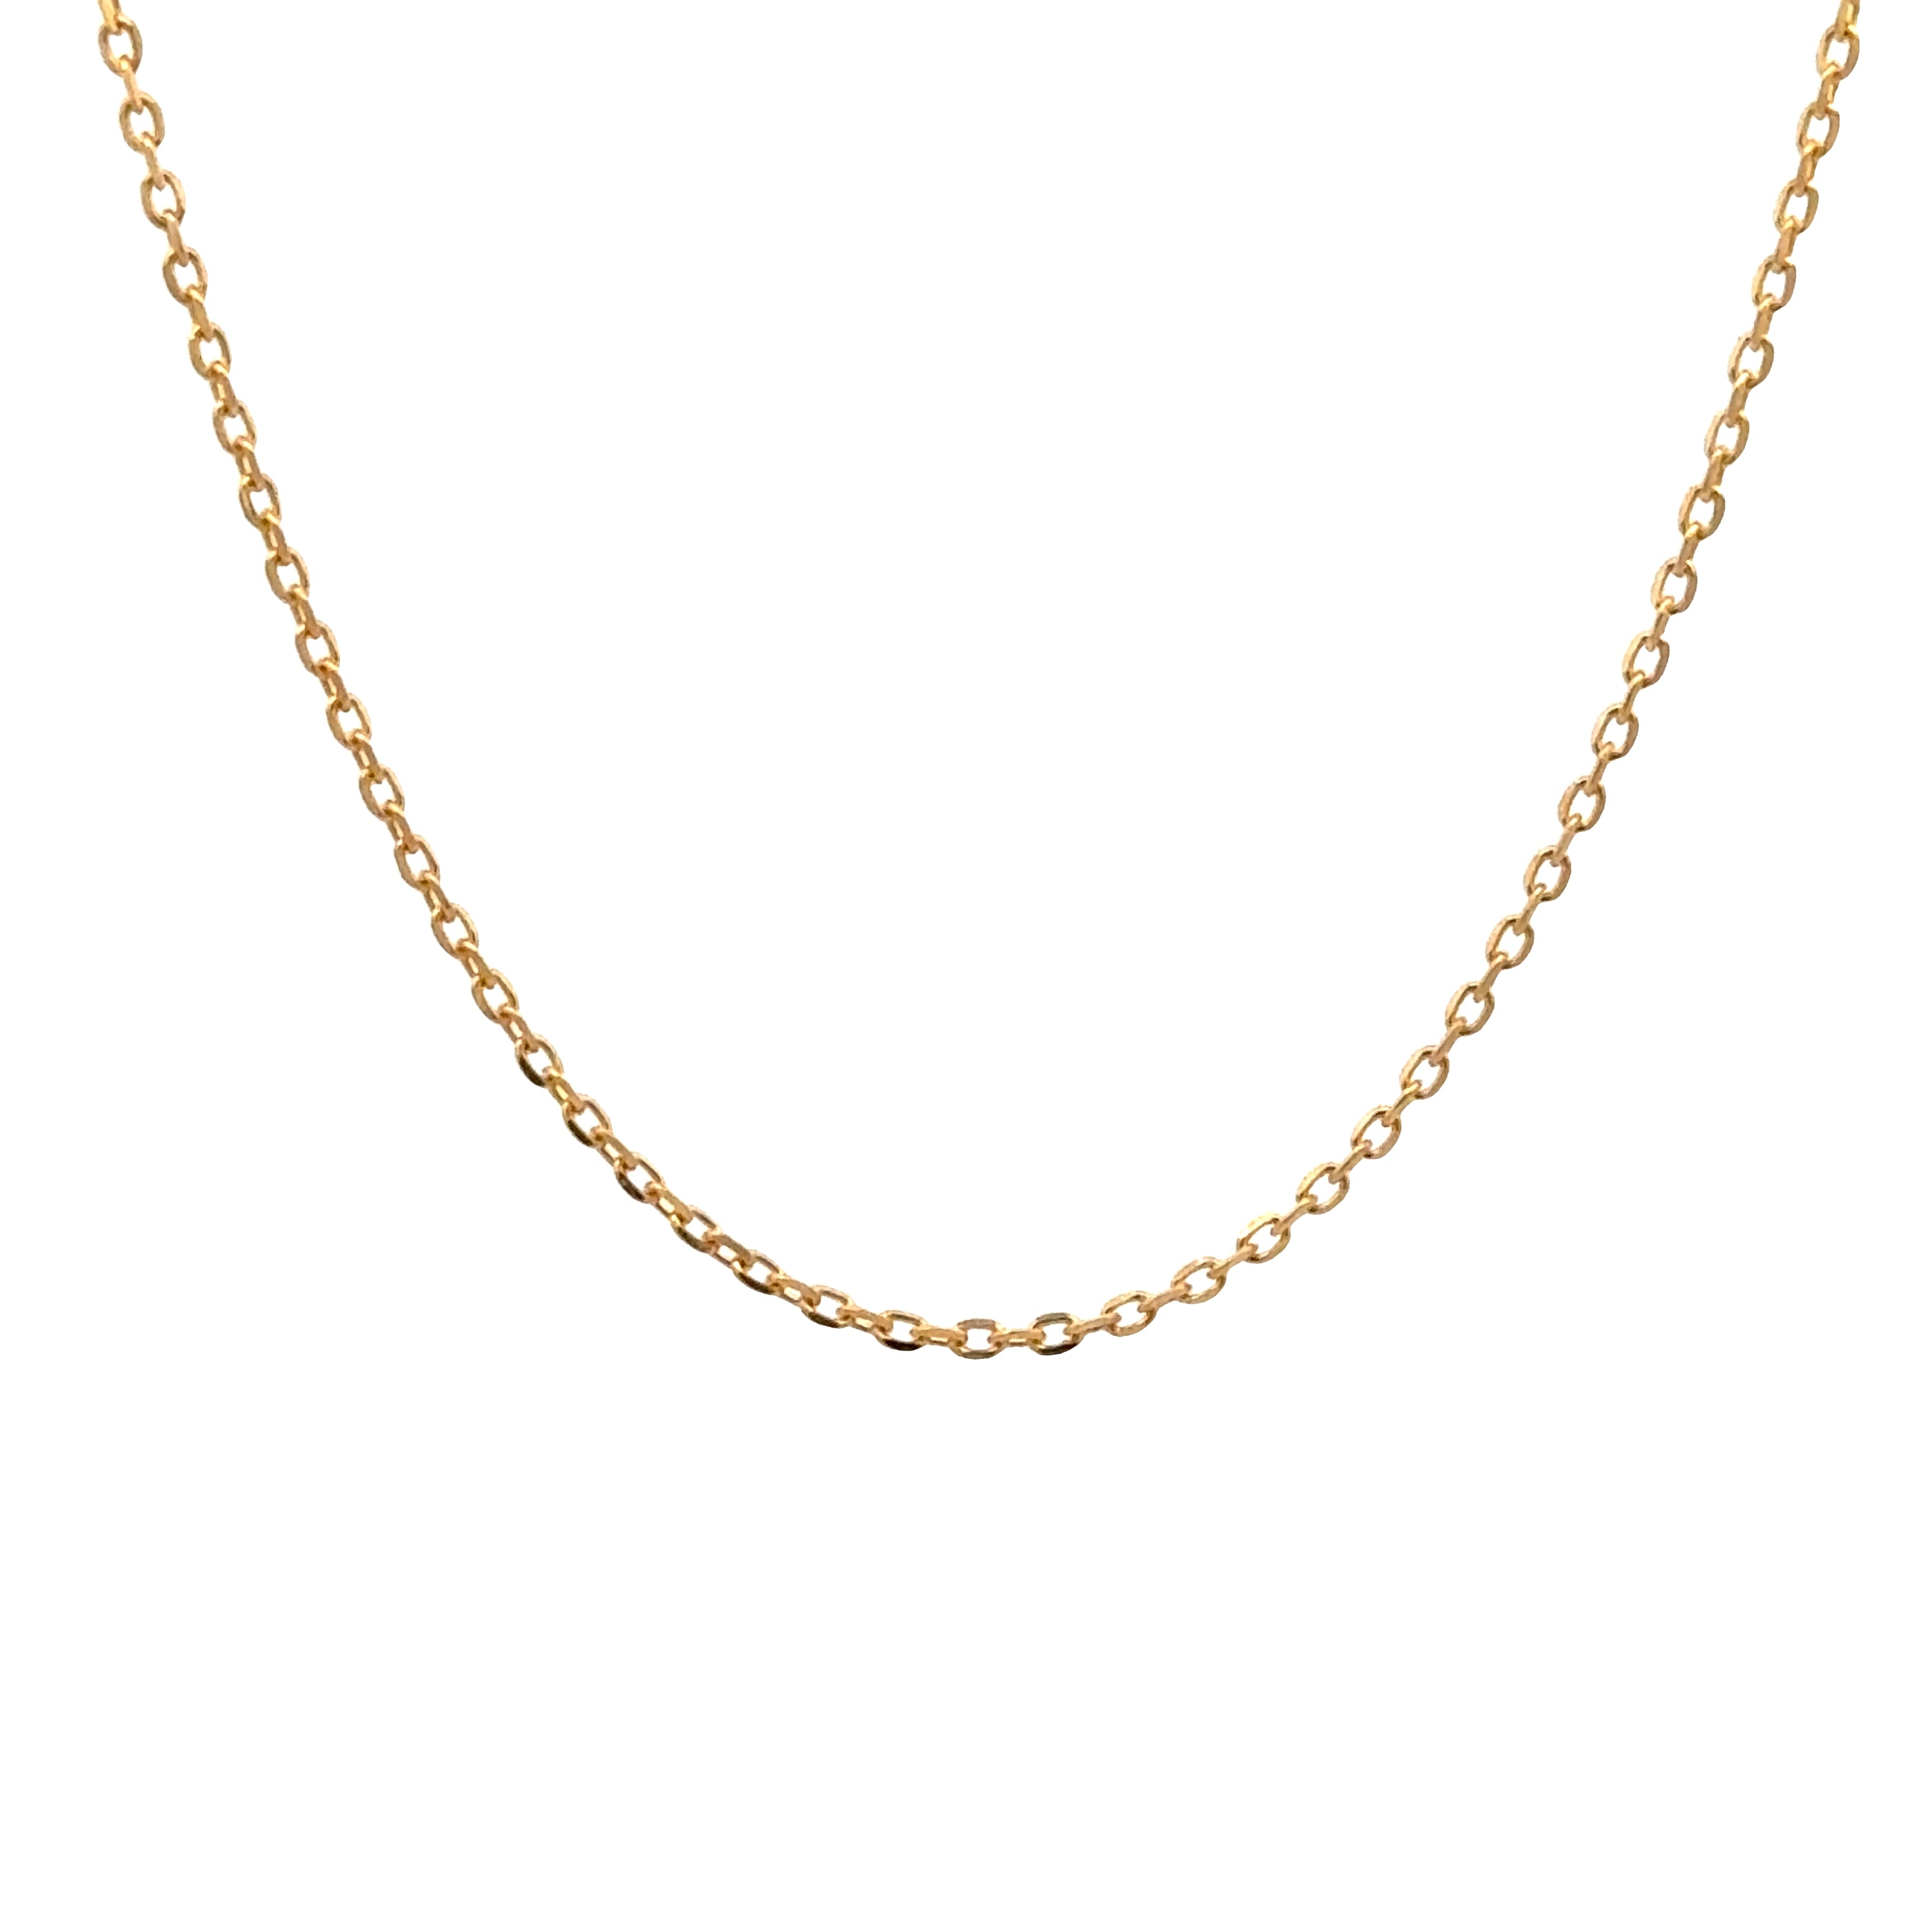 18K Yellow Gold 45cm Diamond Cut Cable Chain Necklace